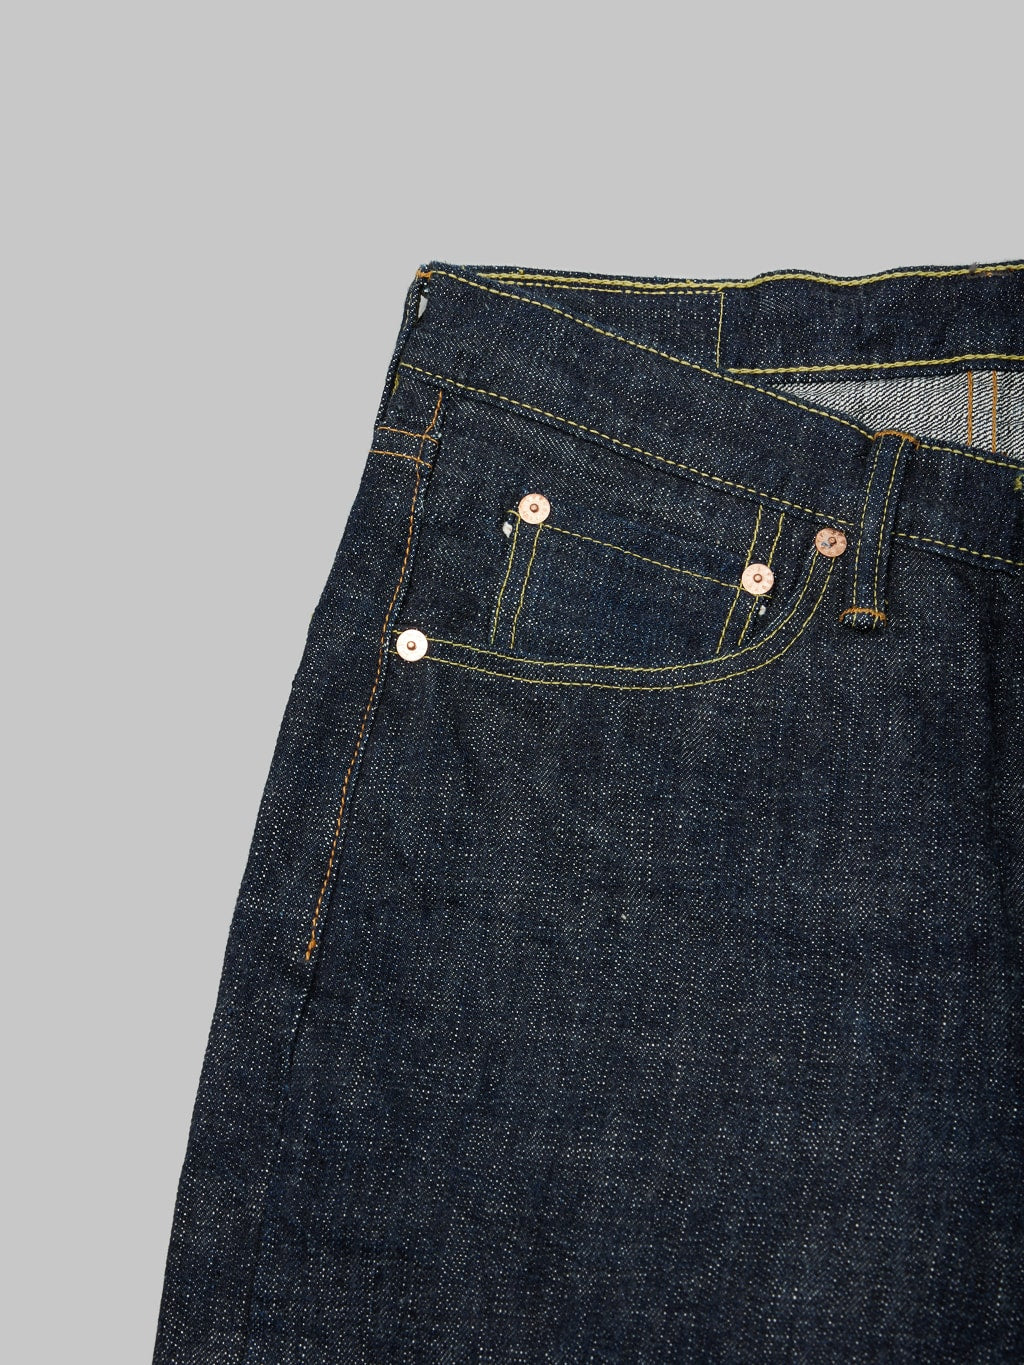 Fob factory slim straight jean front coin pocket detail